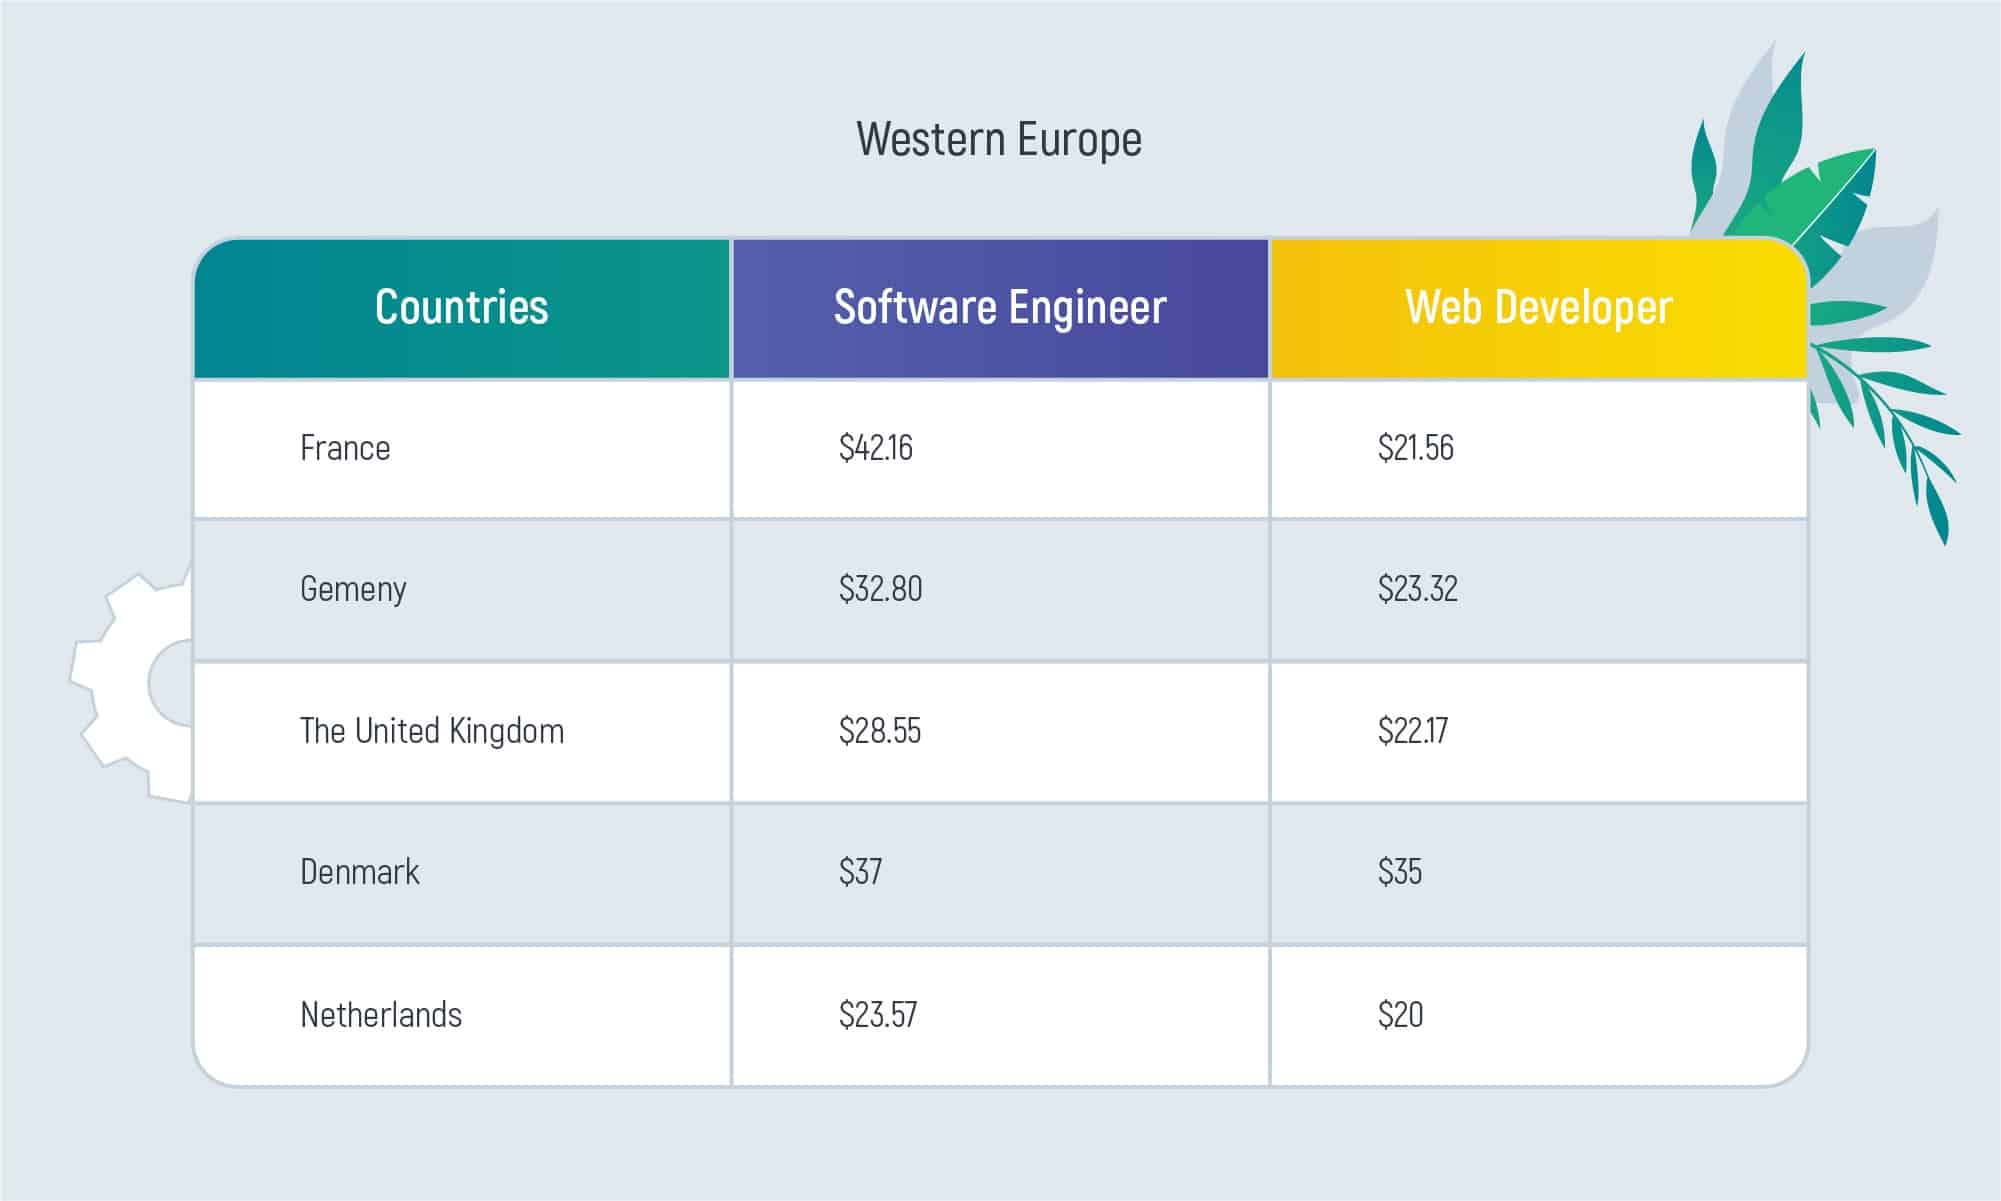 Western Europe’s software engineer hourly rate